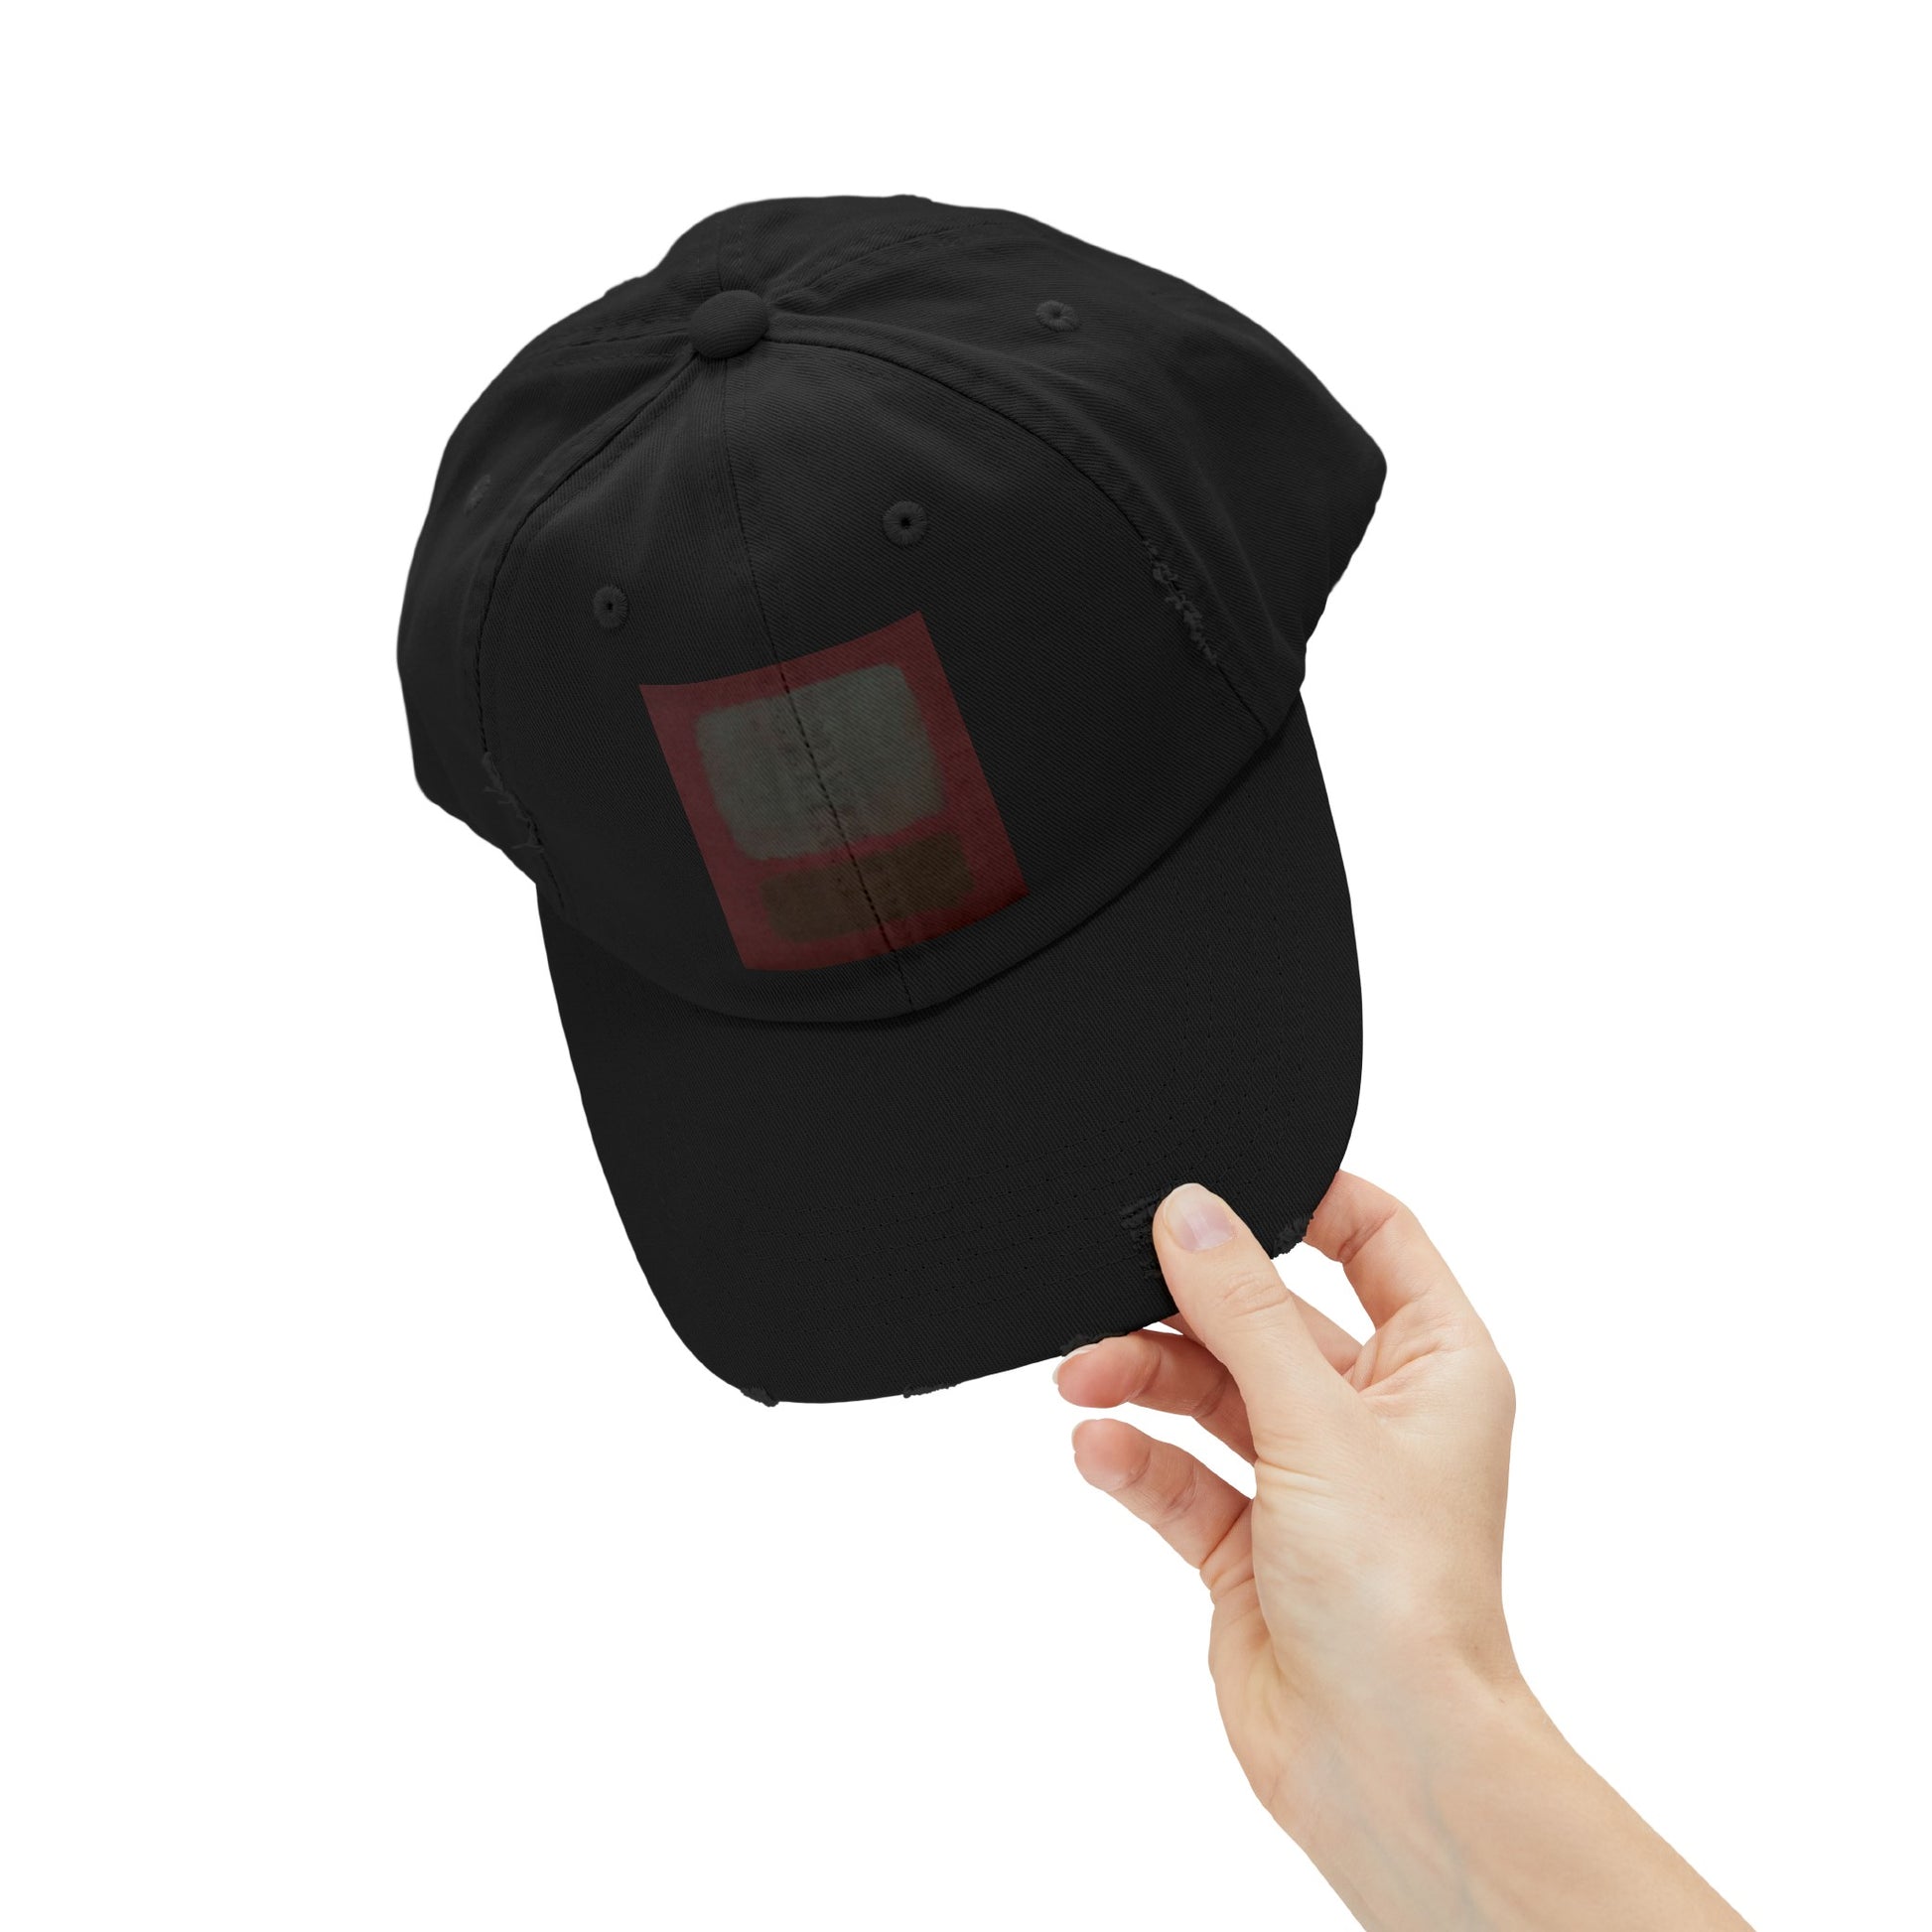 a hand holding a black hat with a red square on it